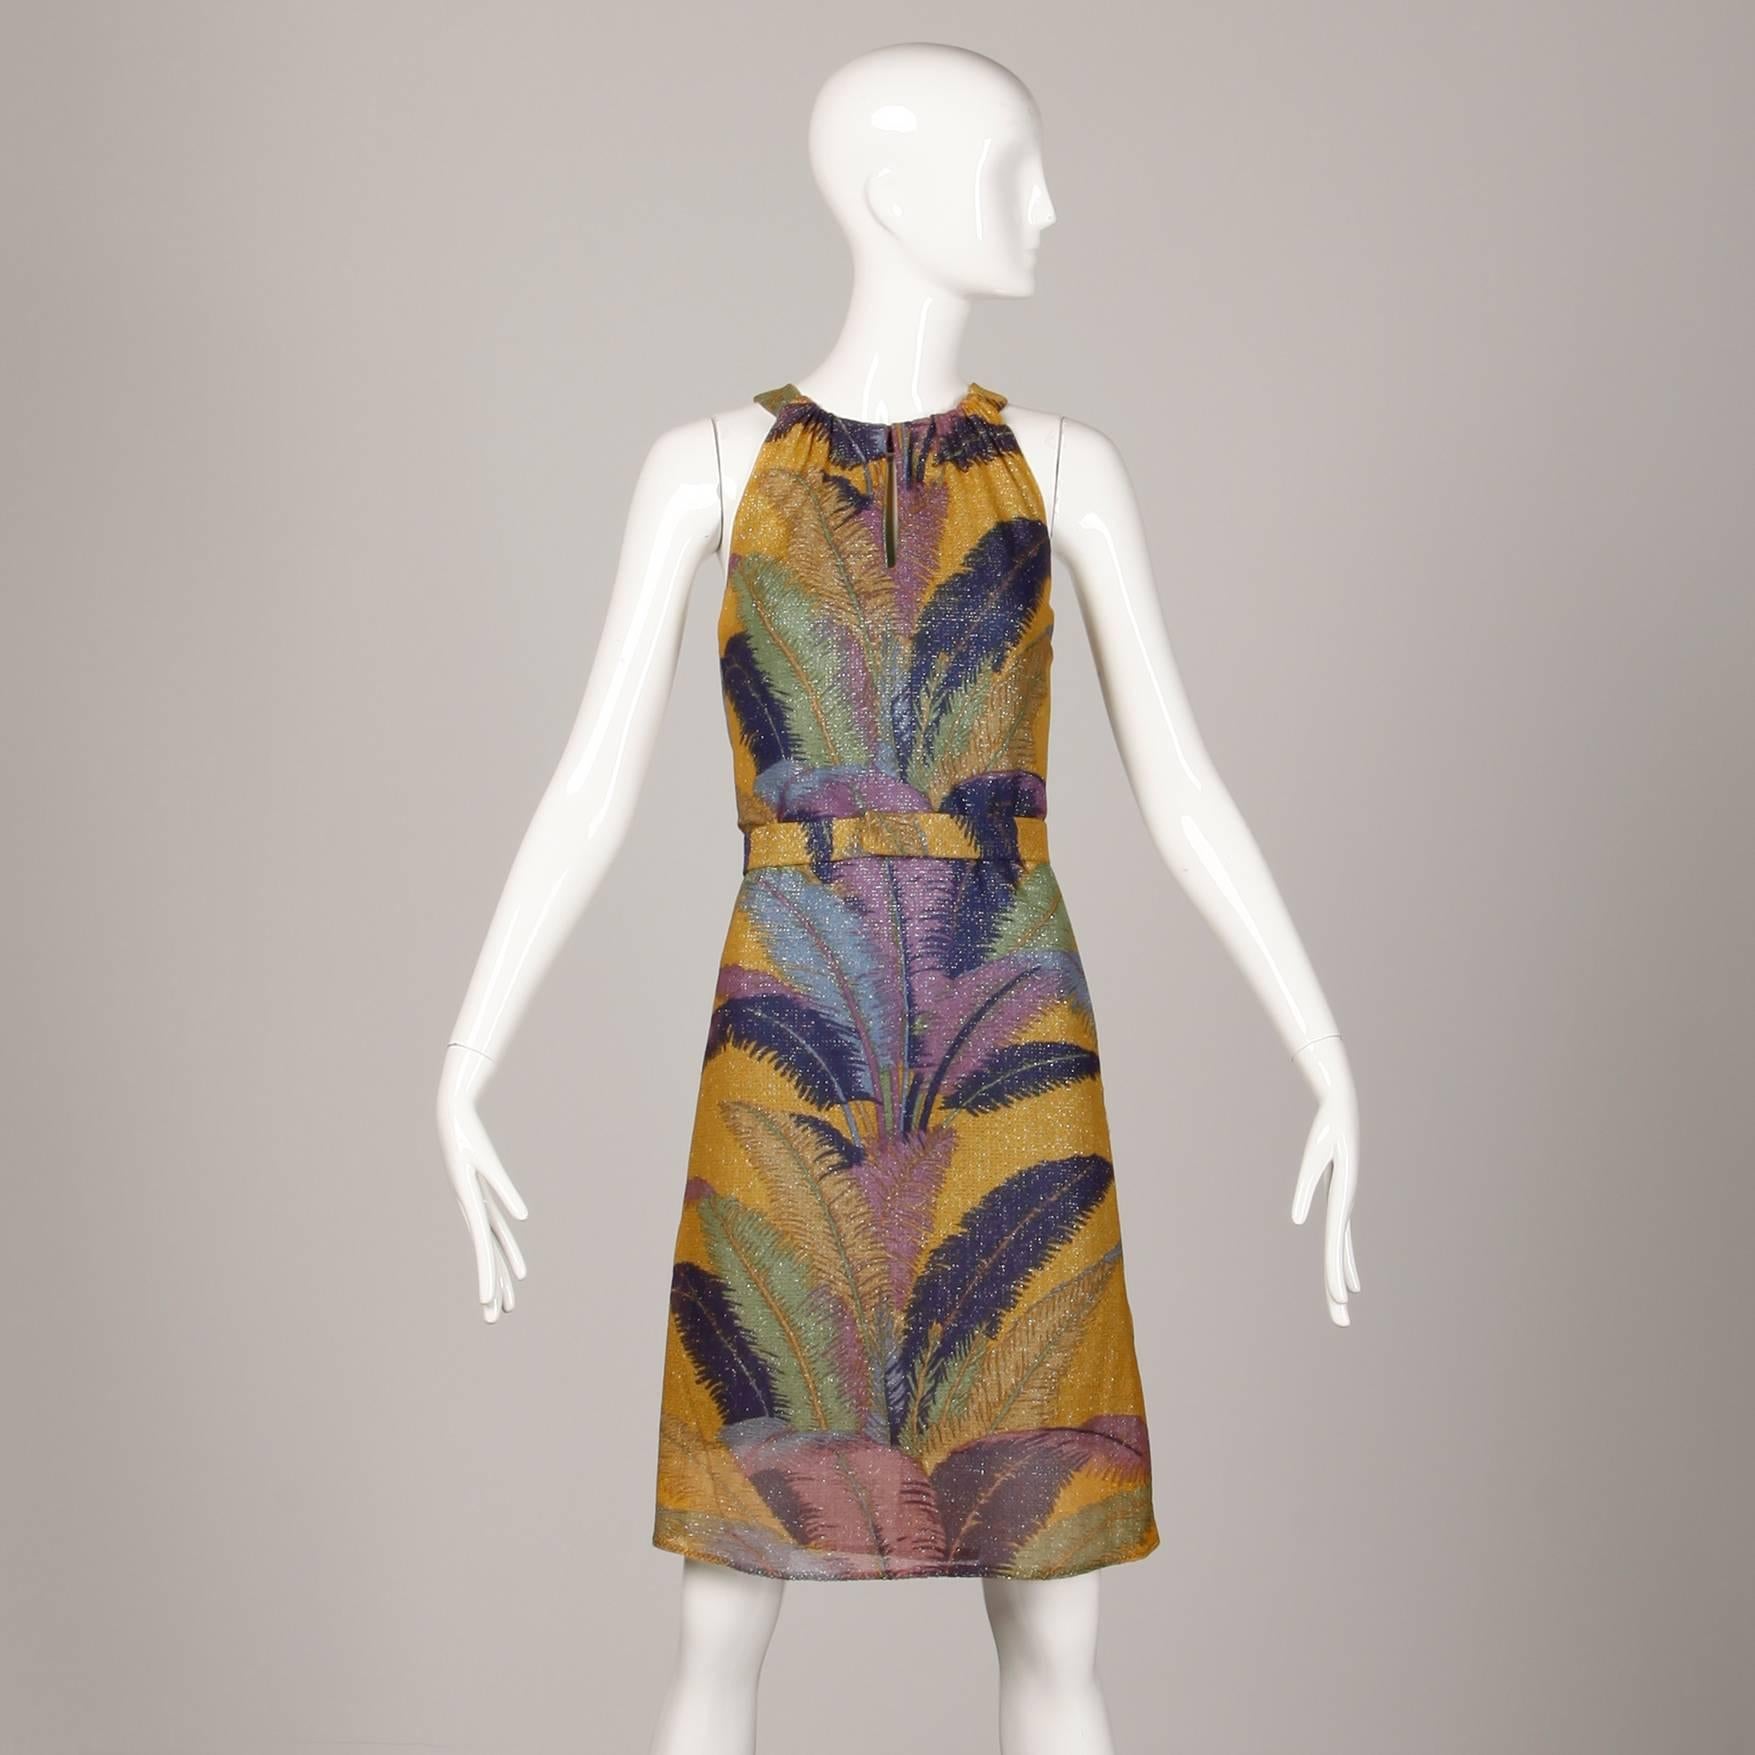 Colorful metallic tropical print halter dress with keyhole neckline by Marchesa di Grésy for I. Magnin. Fully lined with rear metal zip closure. The marked size is 10, but the dress fits like  modern size small. The bust measures 36", waist